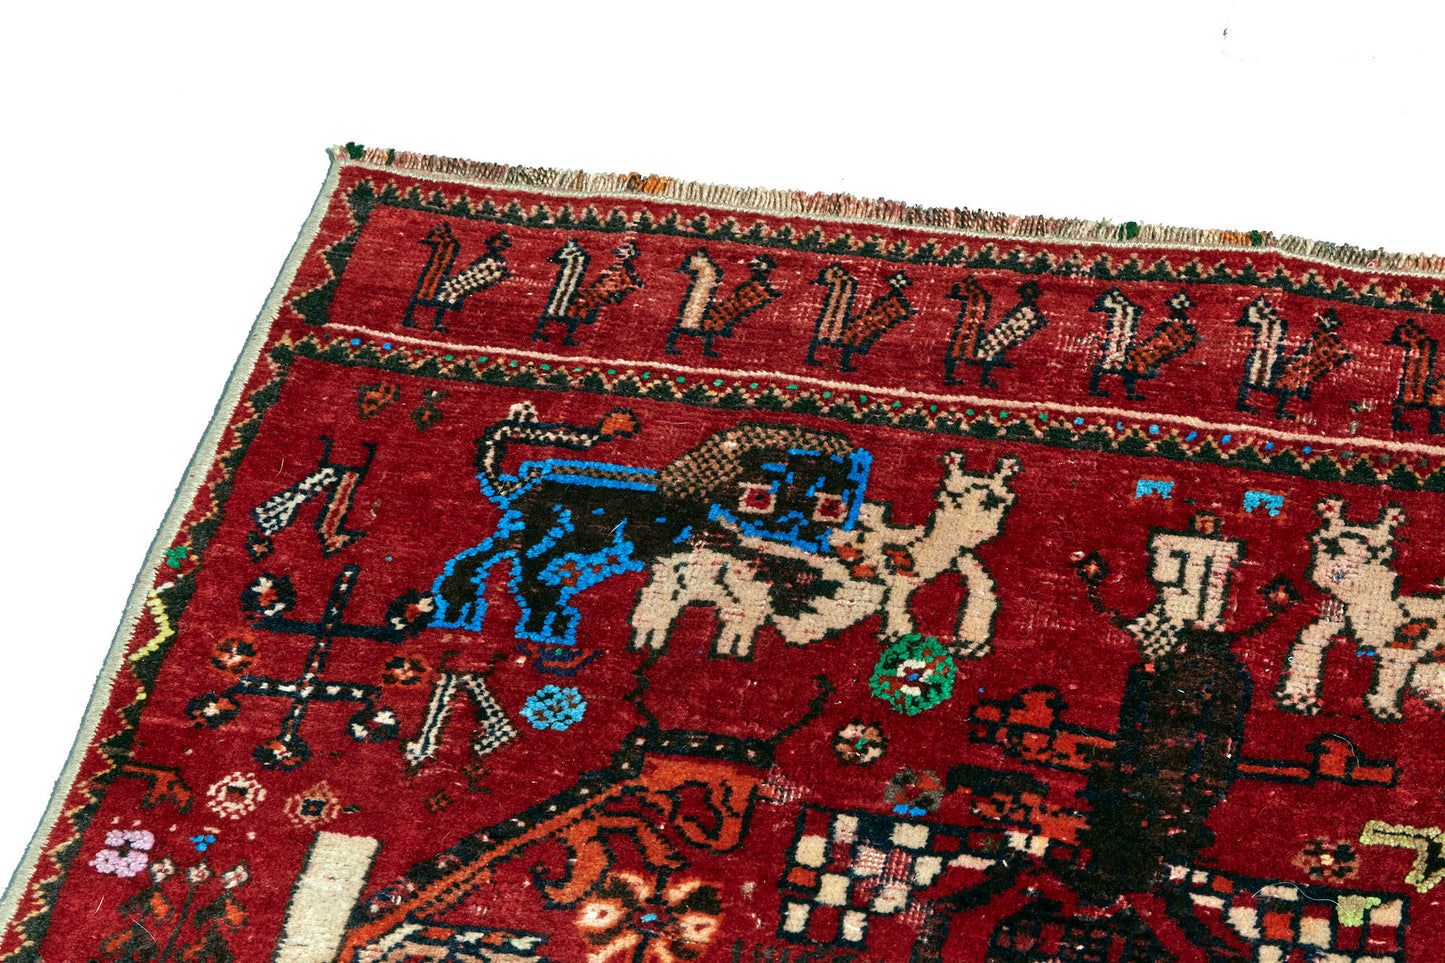 Unique and rare Persian pictorial hand woven rug with red base depicting a man wrestling a lion. Vibrant red and blue tones with cream, green and tan details. Perfect for study, living room, or wall hanging. Available from King Kennedy Rugs Los Angeles